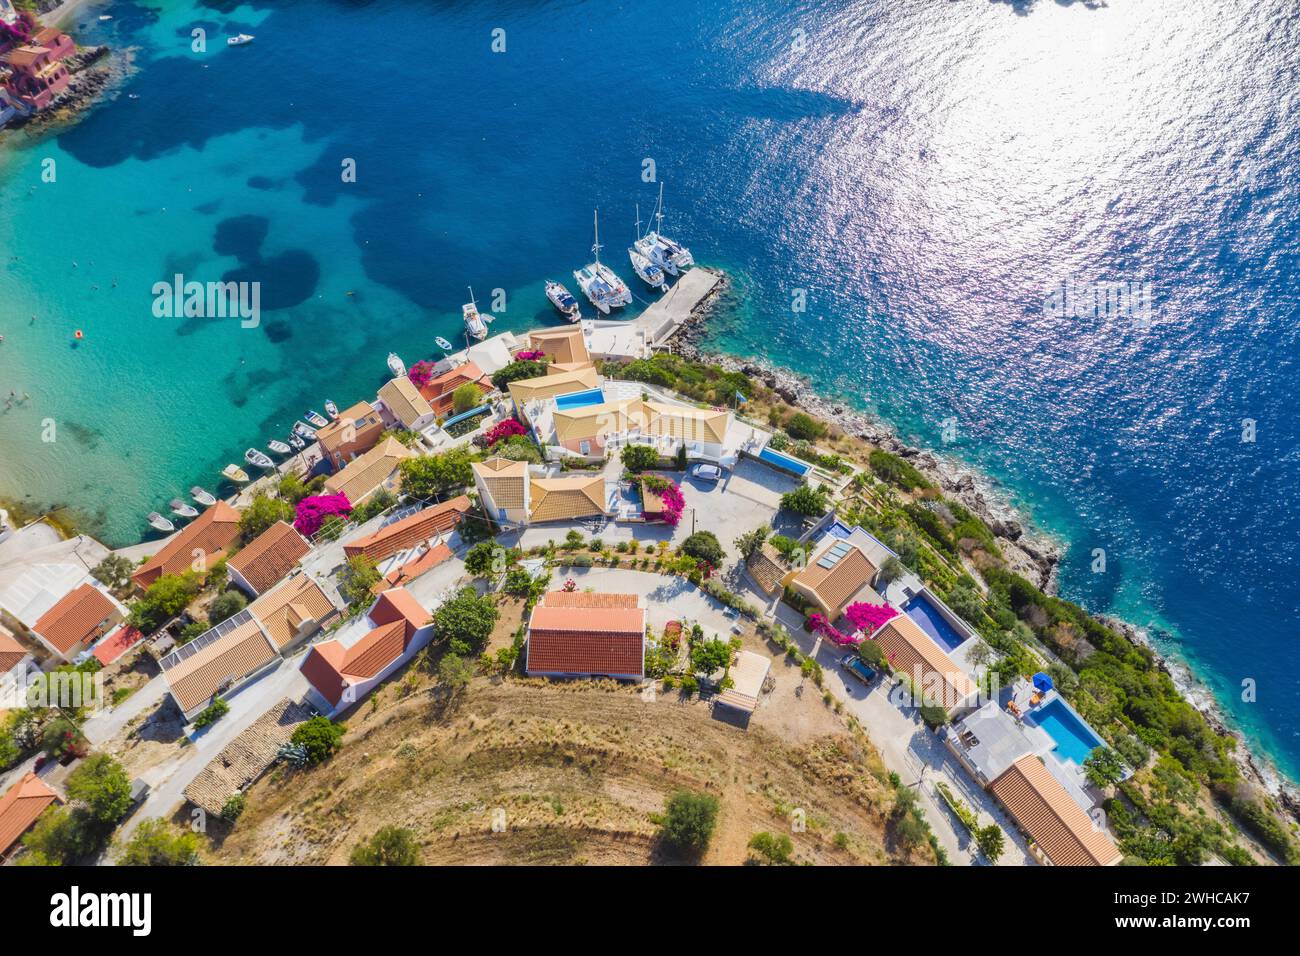 Assos picturesque fishing village from above, Kefalonia, Greece. Aerial drone view. Sailing boats moored in turquoise bay. Stock Photo